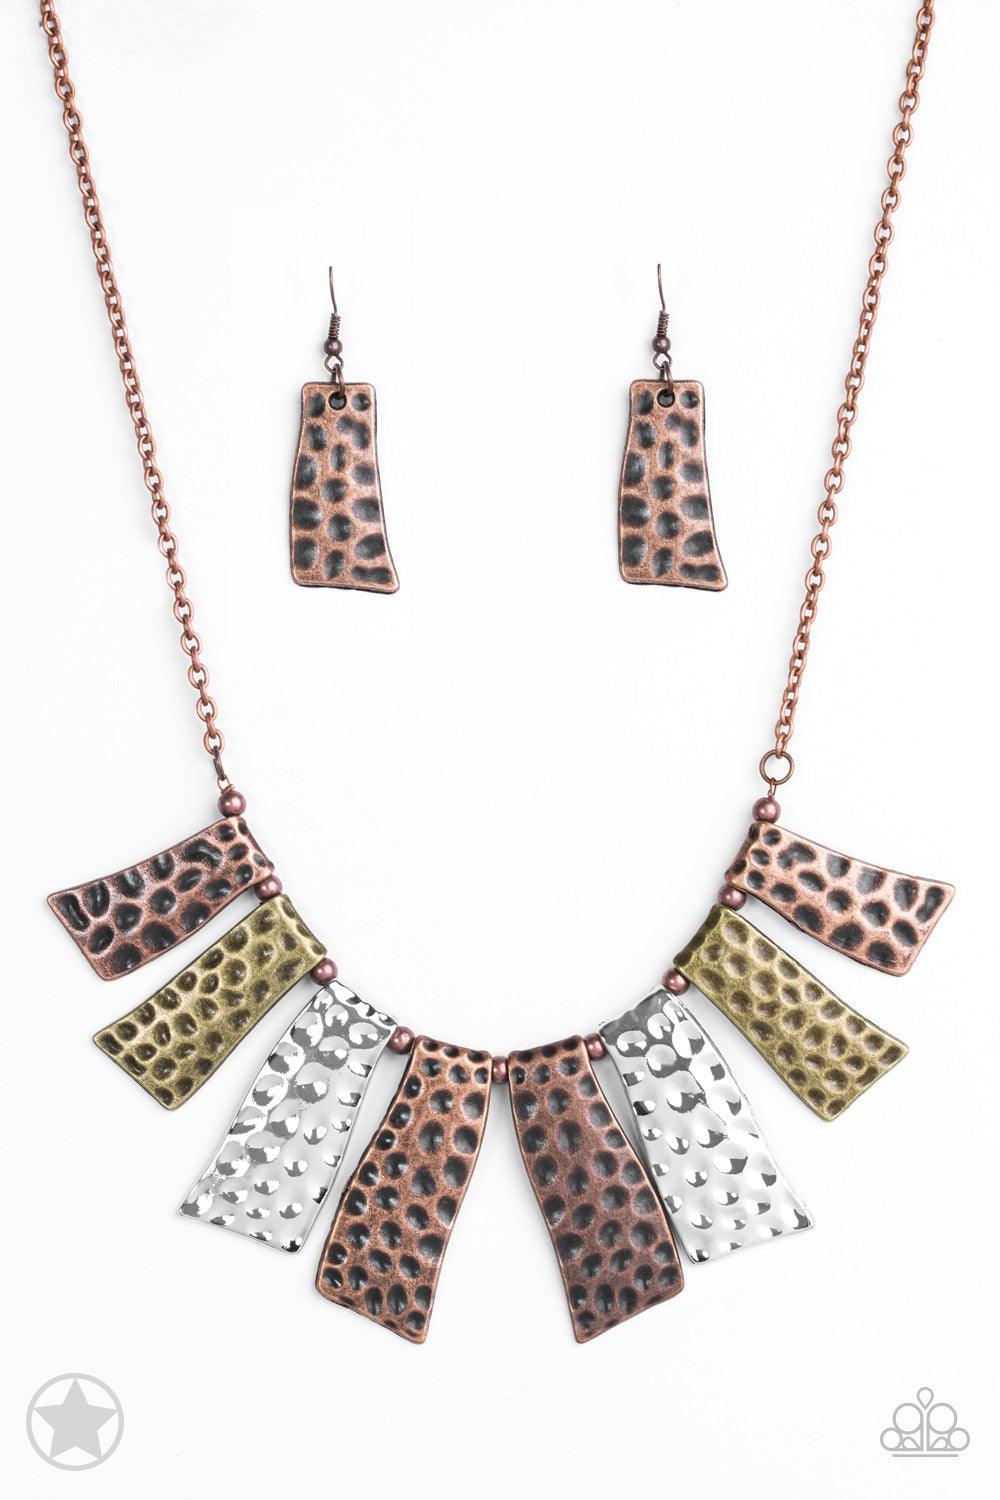 Paparazzi Accessories A Fan Of The Tribe Abstract wavy plates of copper, silver, and brass are texturized with eye-catching hammered divots and alternating copper beads along a copper chain. Features an adjustable clasp closure. Necklace